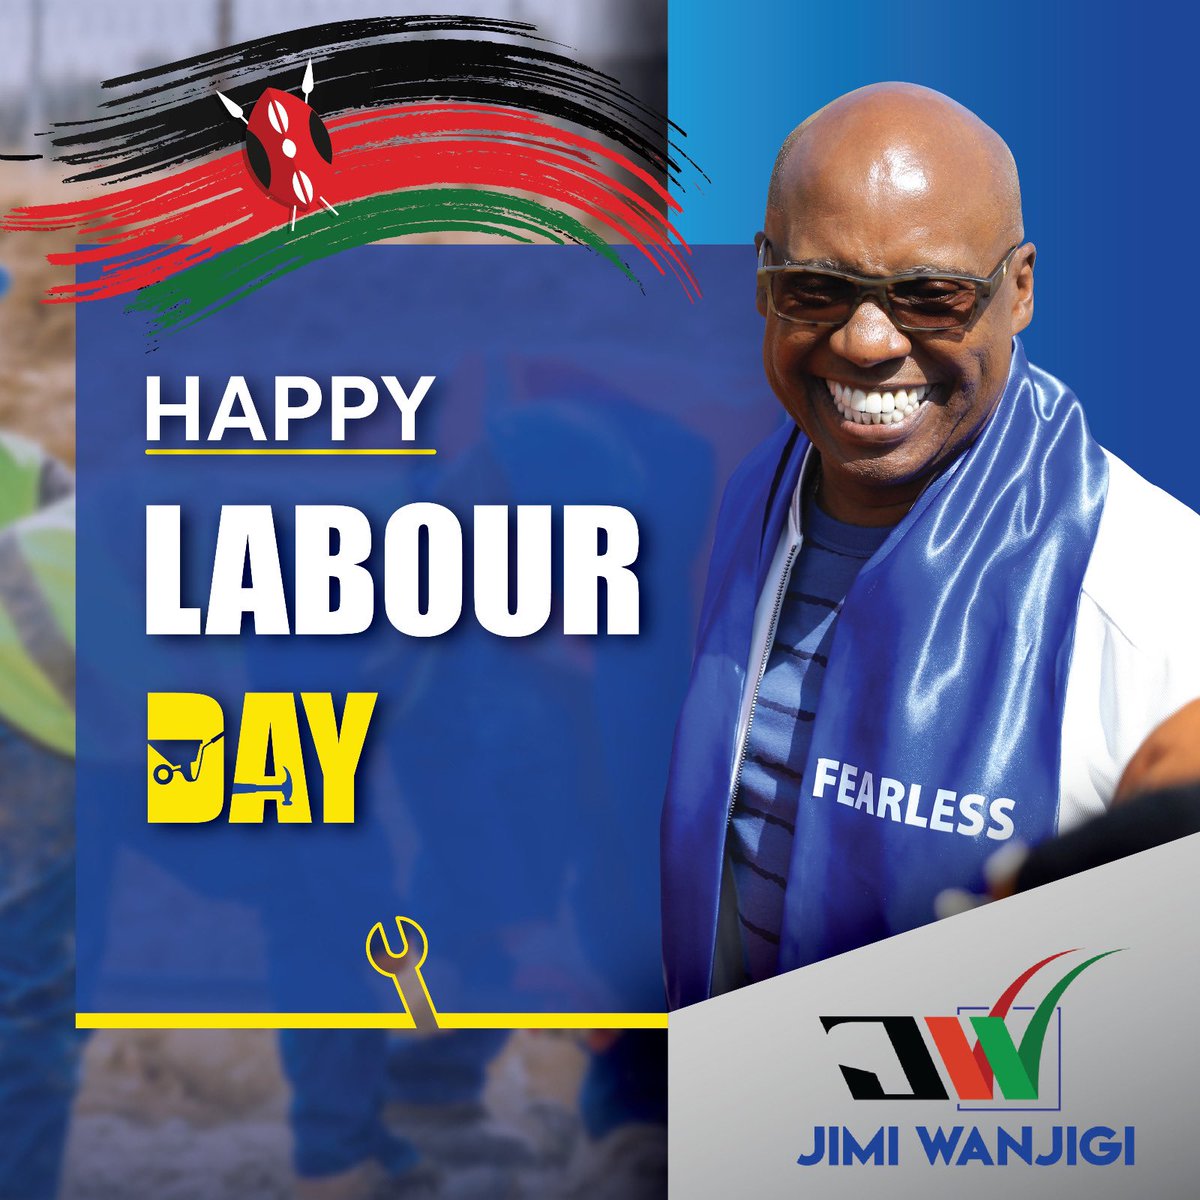 Happy labour day to all! Among many other blessings, Kenya has a great manpower, and today is a day to honour that, however, let us not forget the grievances of the Kenyan wokers. It is unacceptable that workers in this country have to take to the streets to demand their basic…